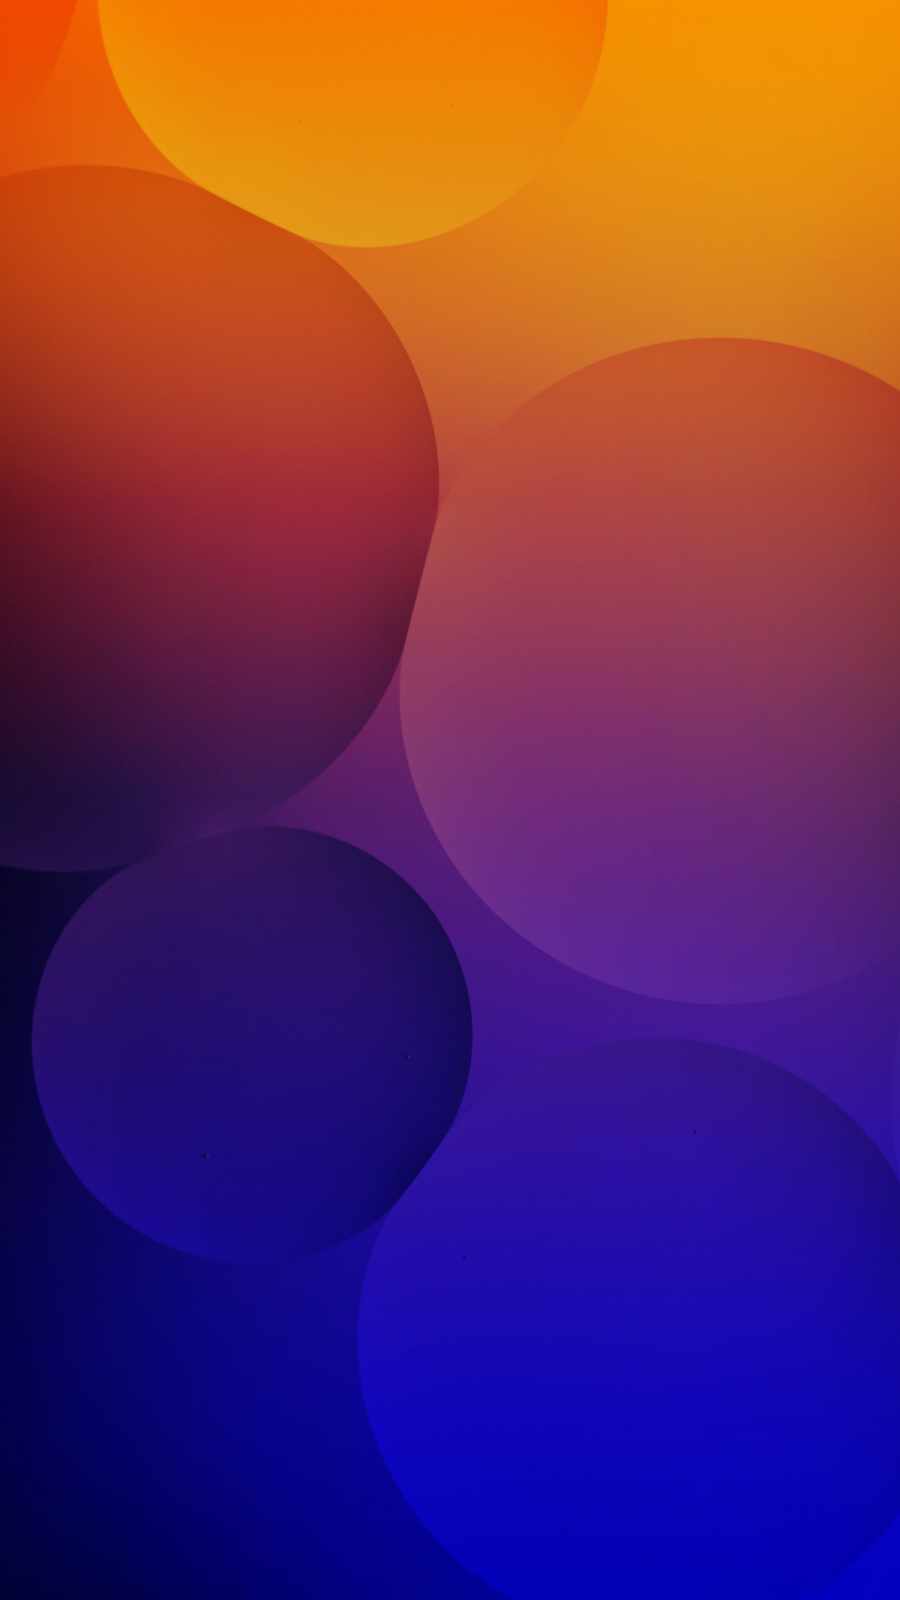 3D Bubbles IPhone Wallpaper - IPhone Wallpapers : iPhone Wallpapers